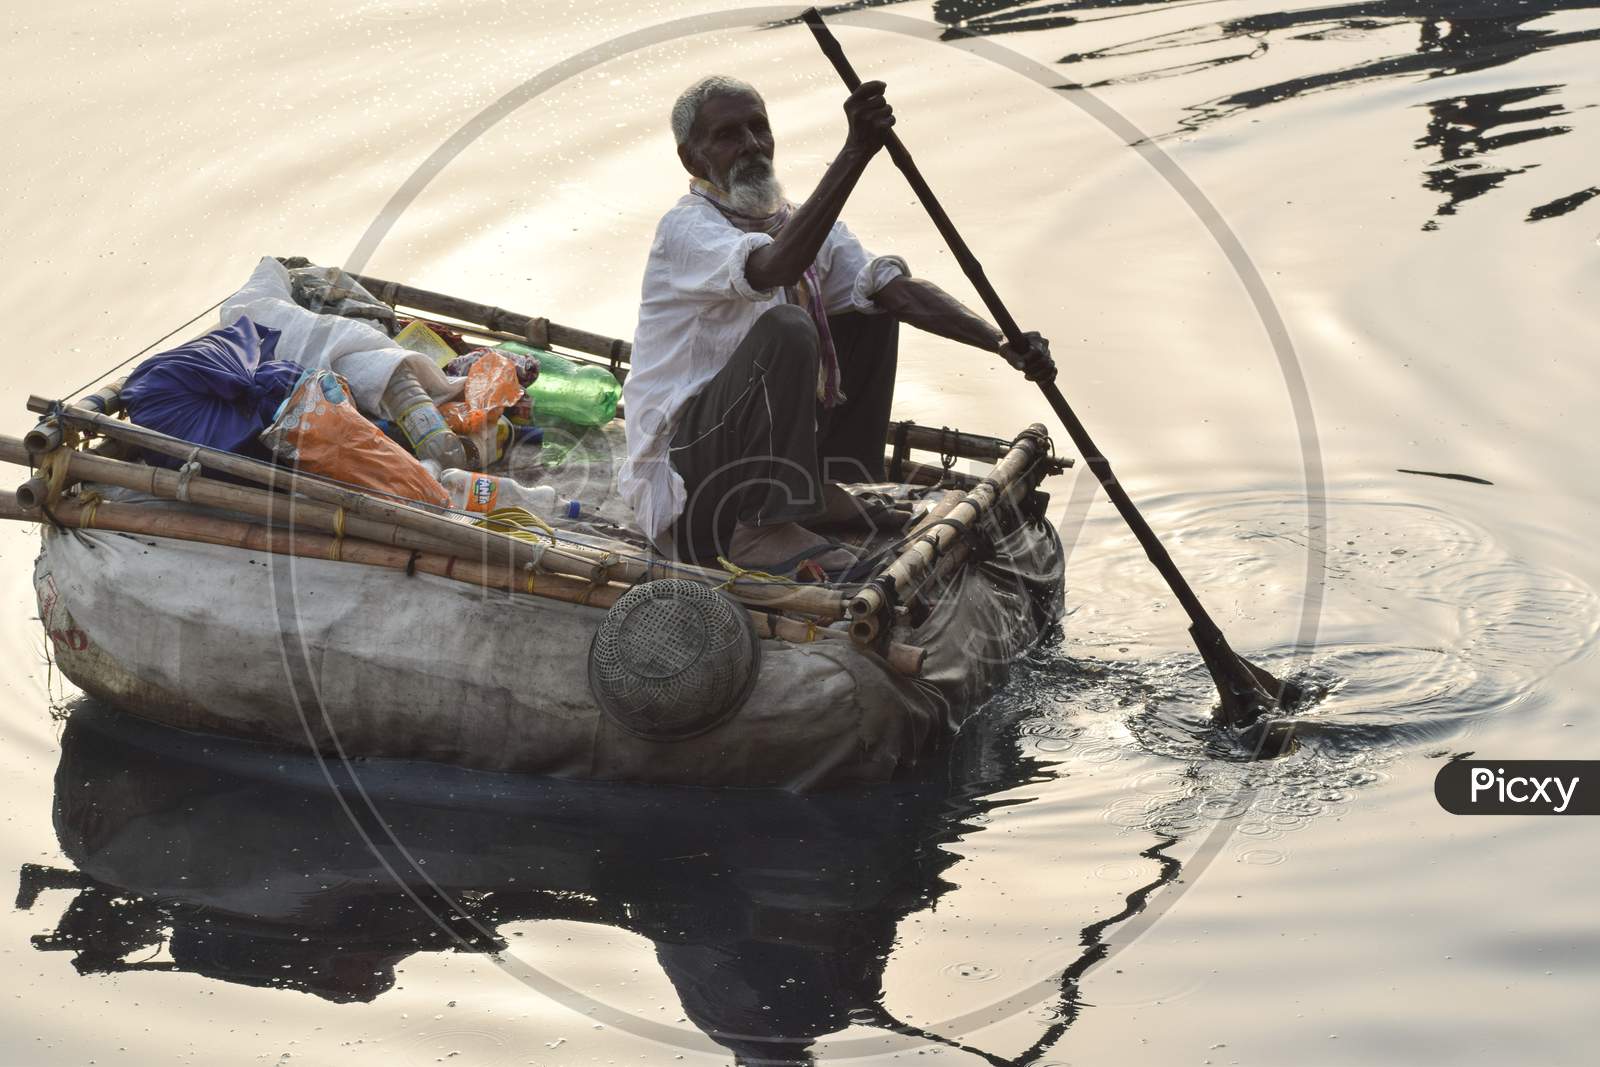 New Delhi, India - March 04, 2020: A man paddling a boat during morning time at Yamuna river ghat in New Deli, India